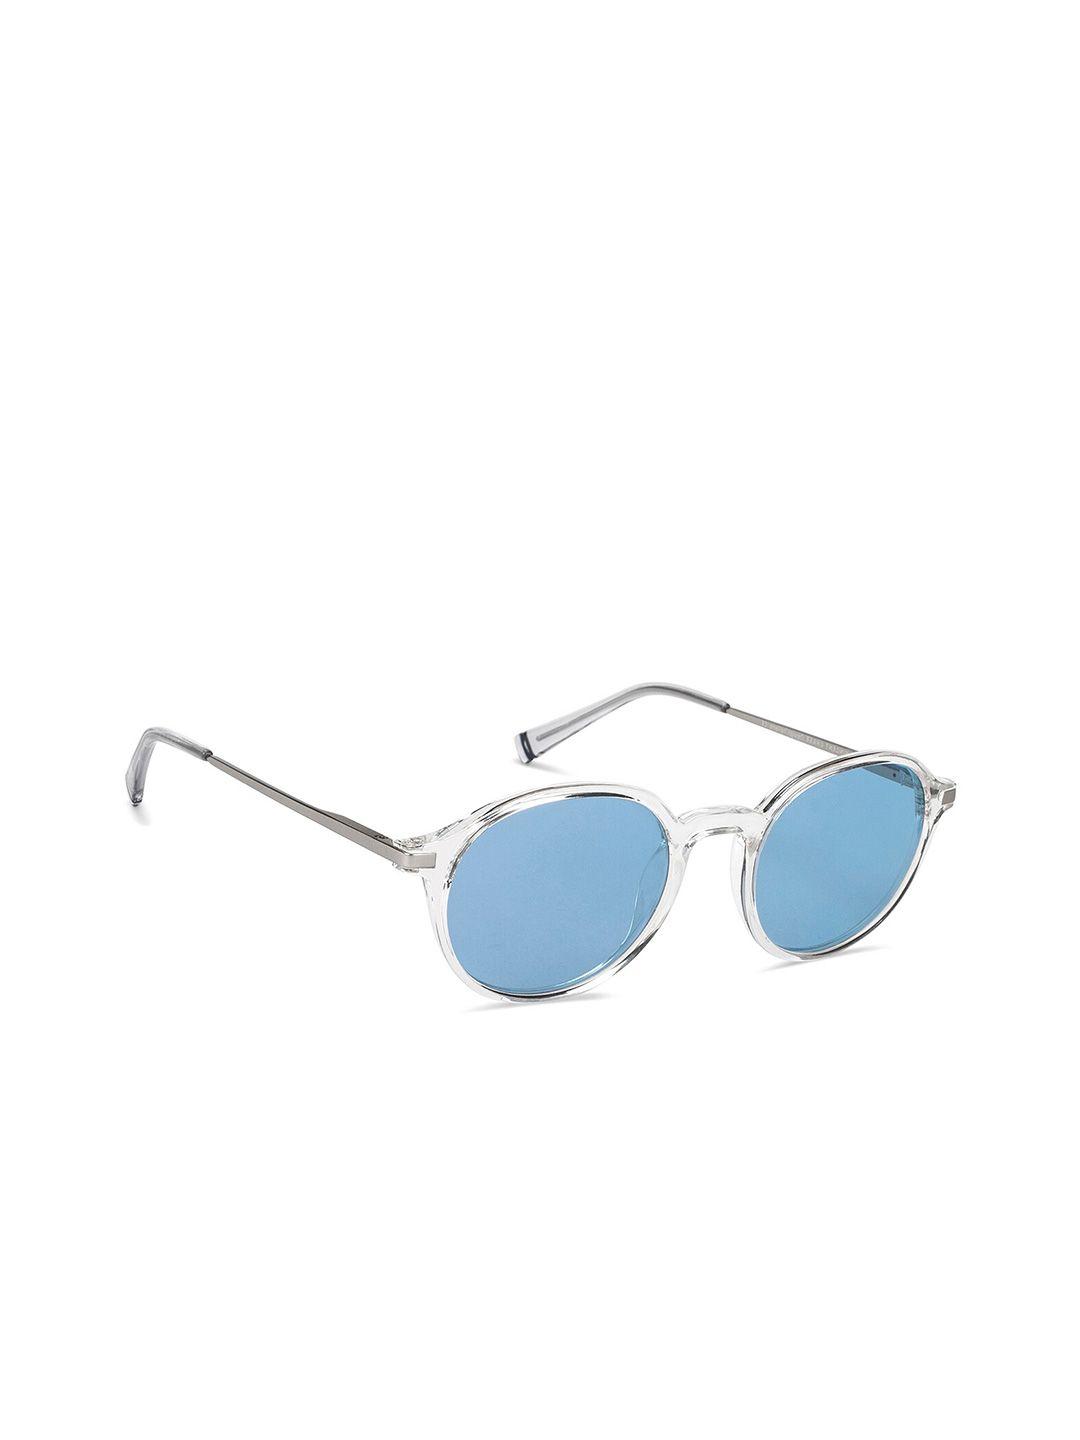 vincent chase unisex blue lens round sunglasses with polarised and uv protected lens